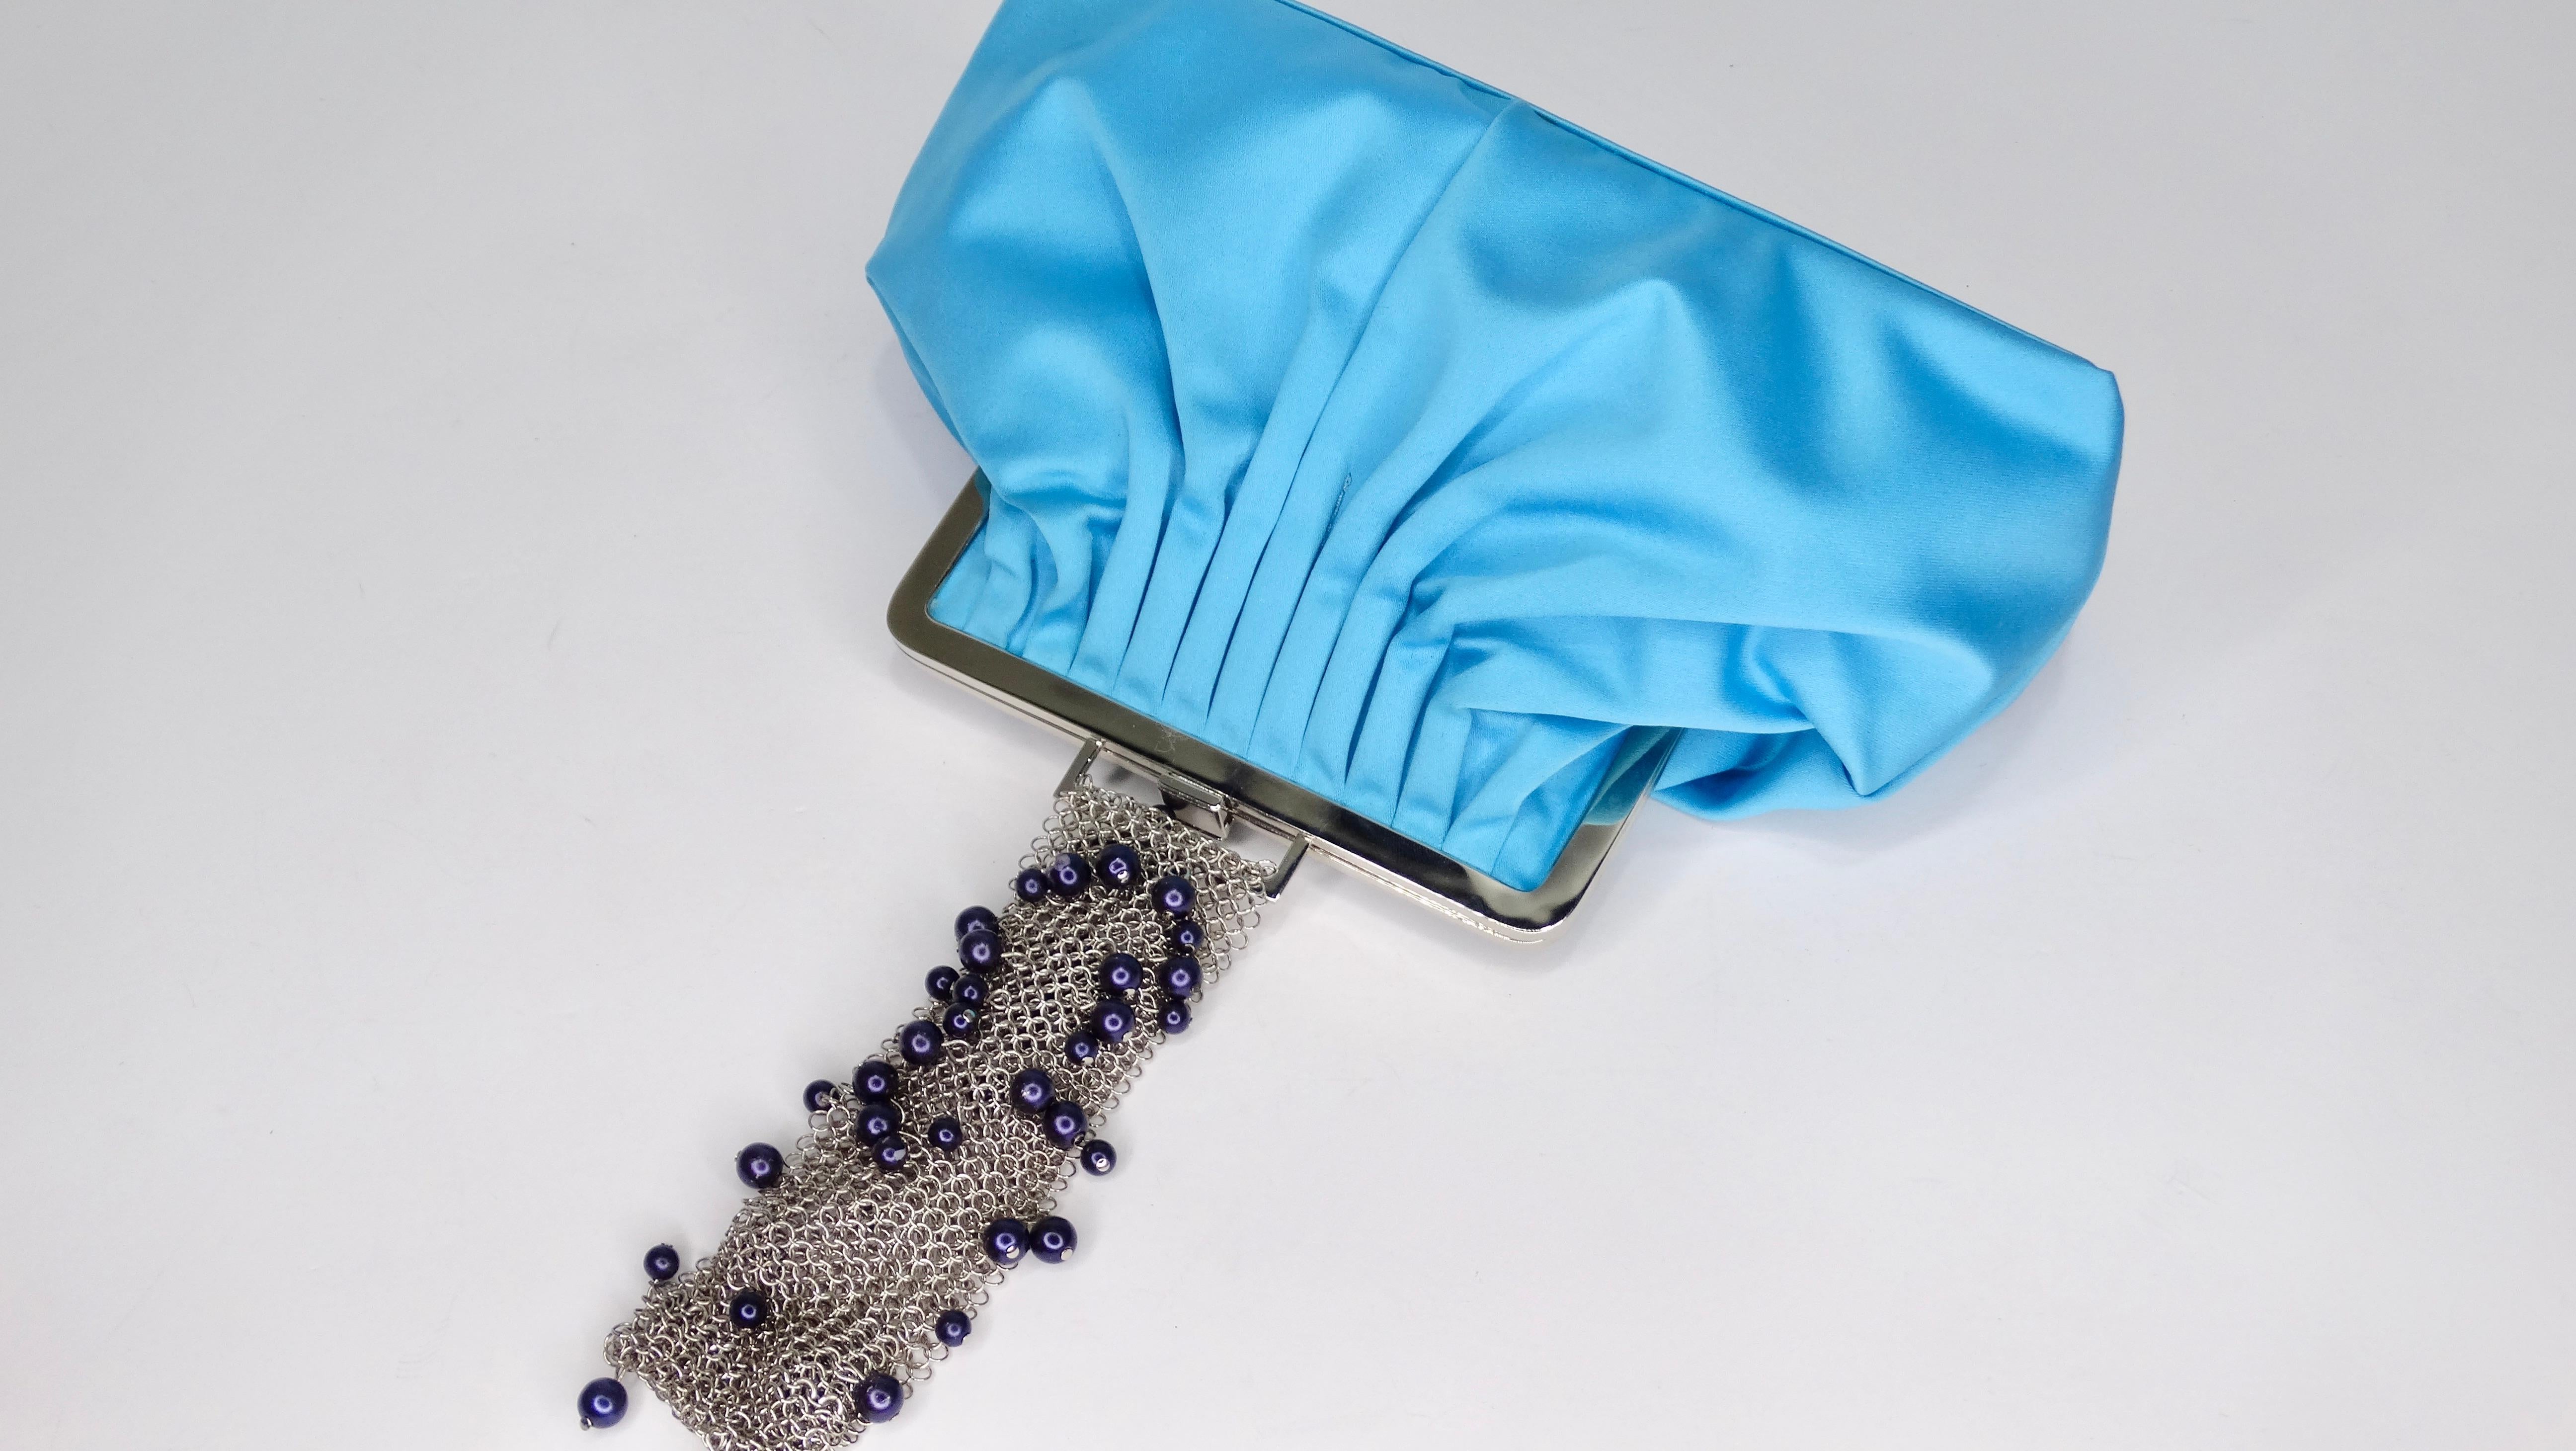 Accessorize in style with this Gianni Versace bag! Circa 1990s, this clutch/wristlet is crafted from aqua blue satin and features pleating at the top, silver hardware, a chainmail wristlet with blue beads, and a Medusa embossed latch closure.